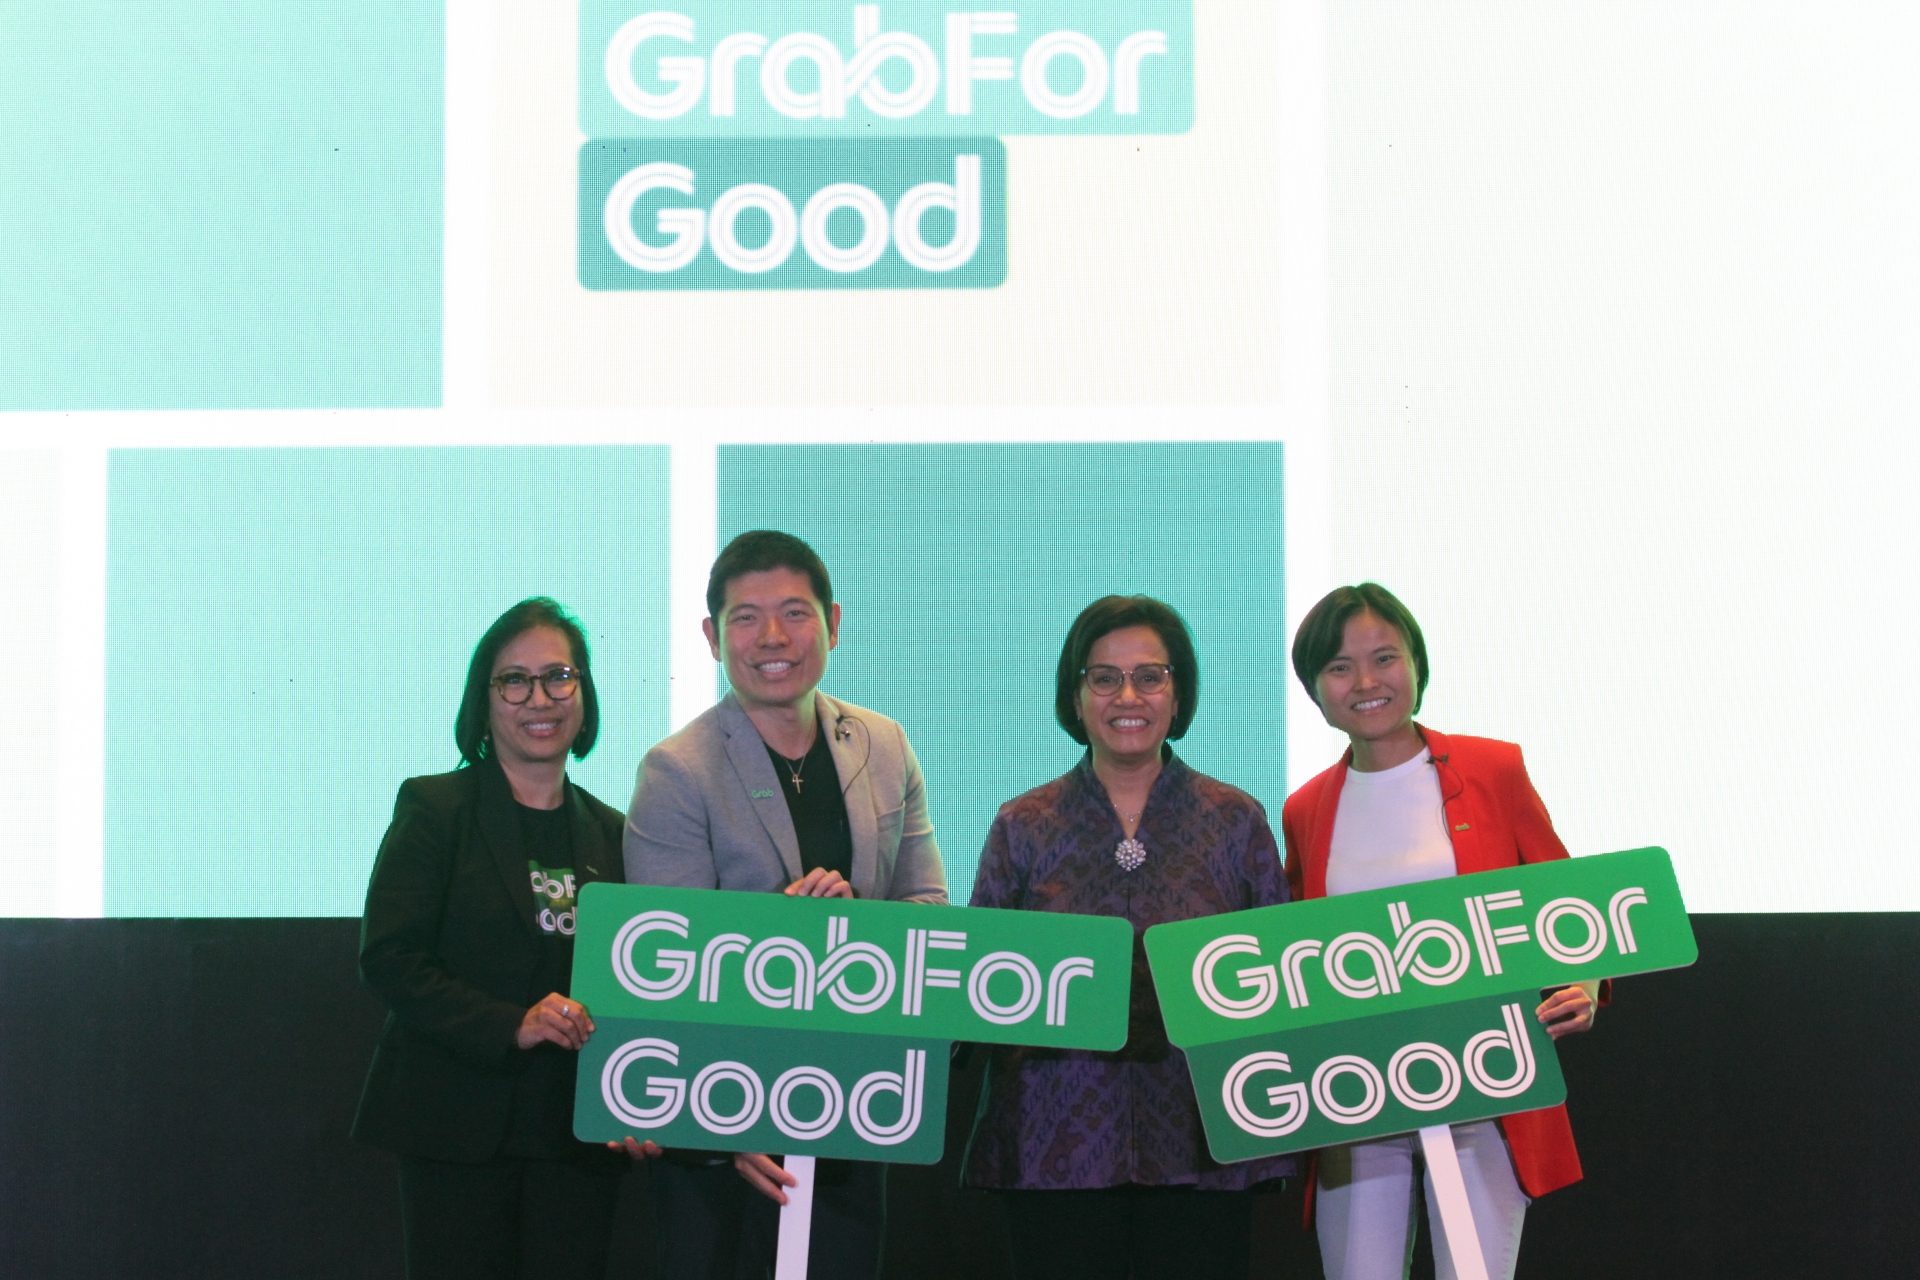 Grab sets 2025 goals to use tech for good in Southeast Asia